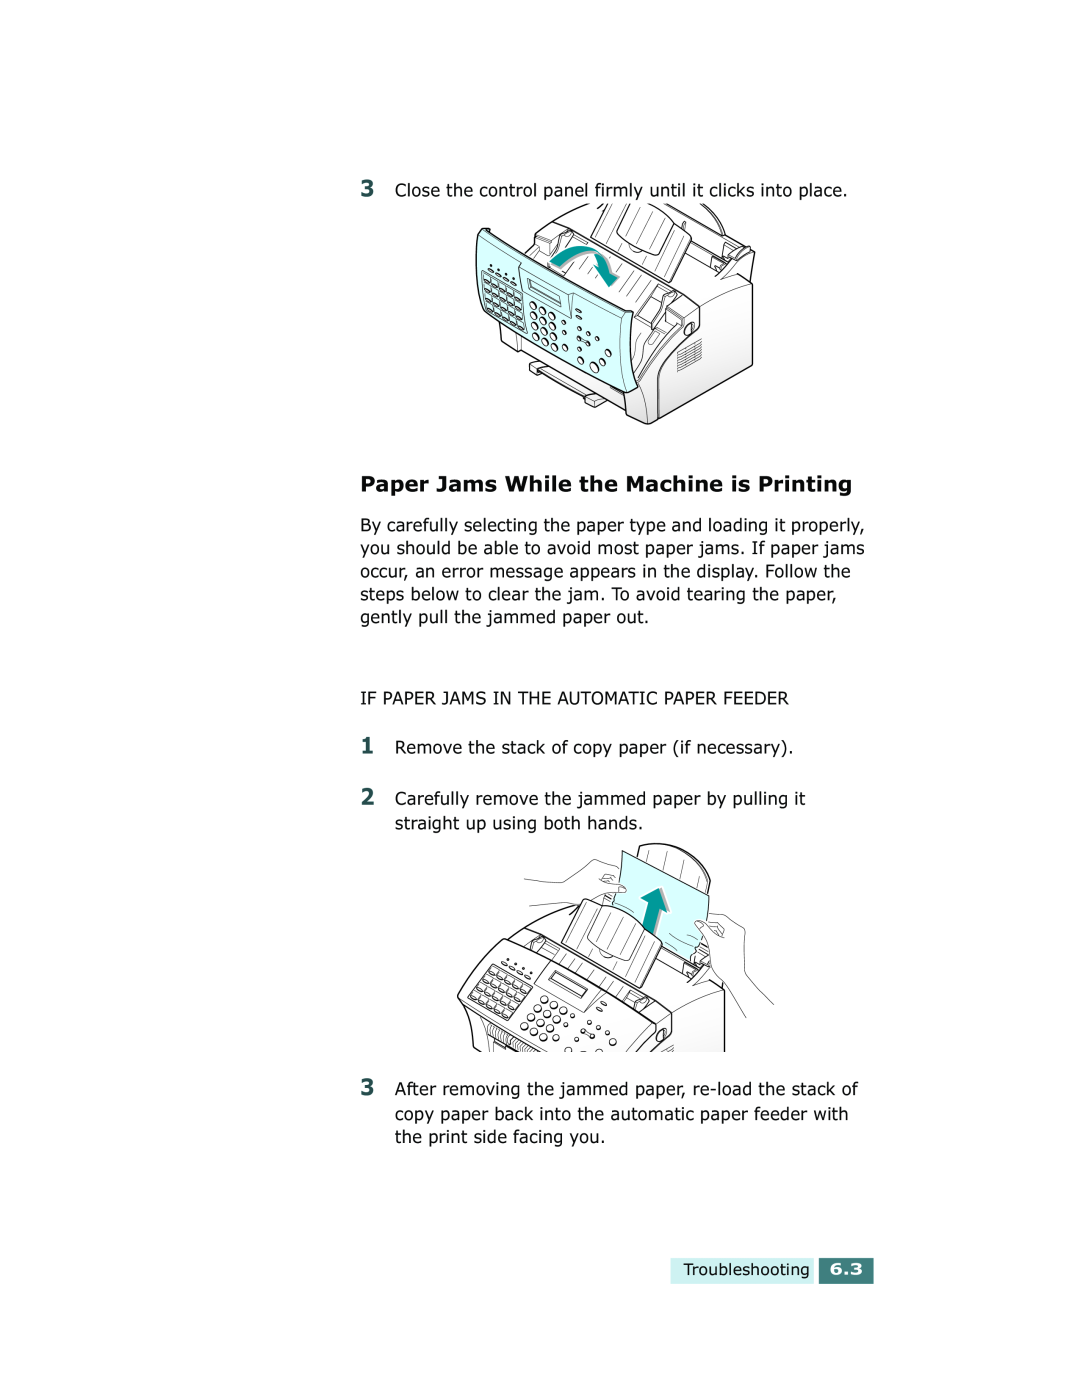 Xerox Pro 580 manual Paper Jams While the Machine is Printing 